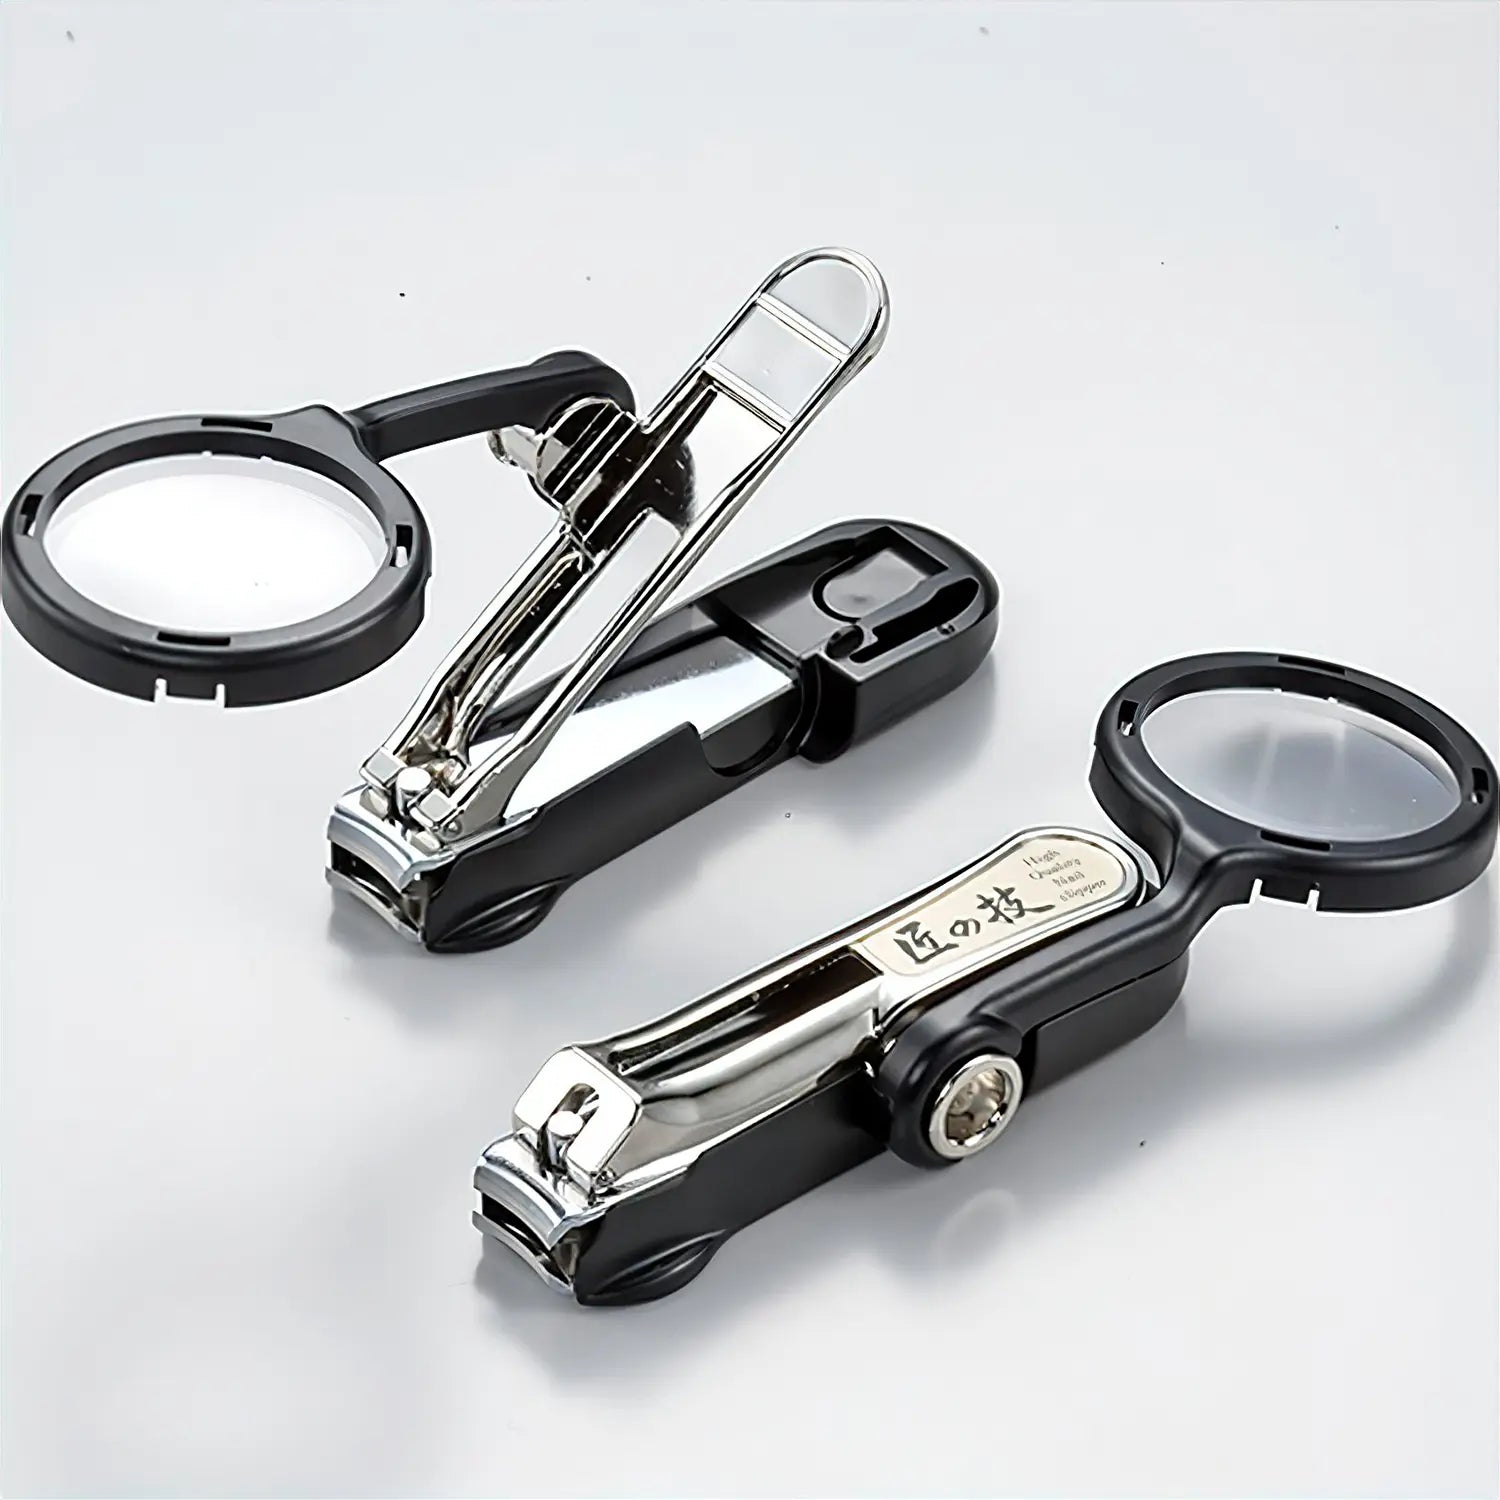 https://www.globalkitchenjapan.com/cdn/shop/files/green-bell-takuminowaza-carbon-steel-nail-clippers-with-magnifier-and-storage-bag-black-g-1223_2.webp?v=1691387719